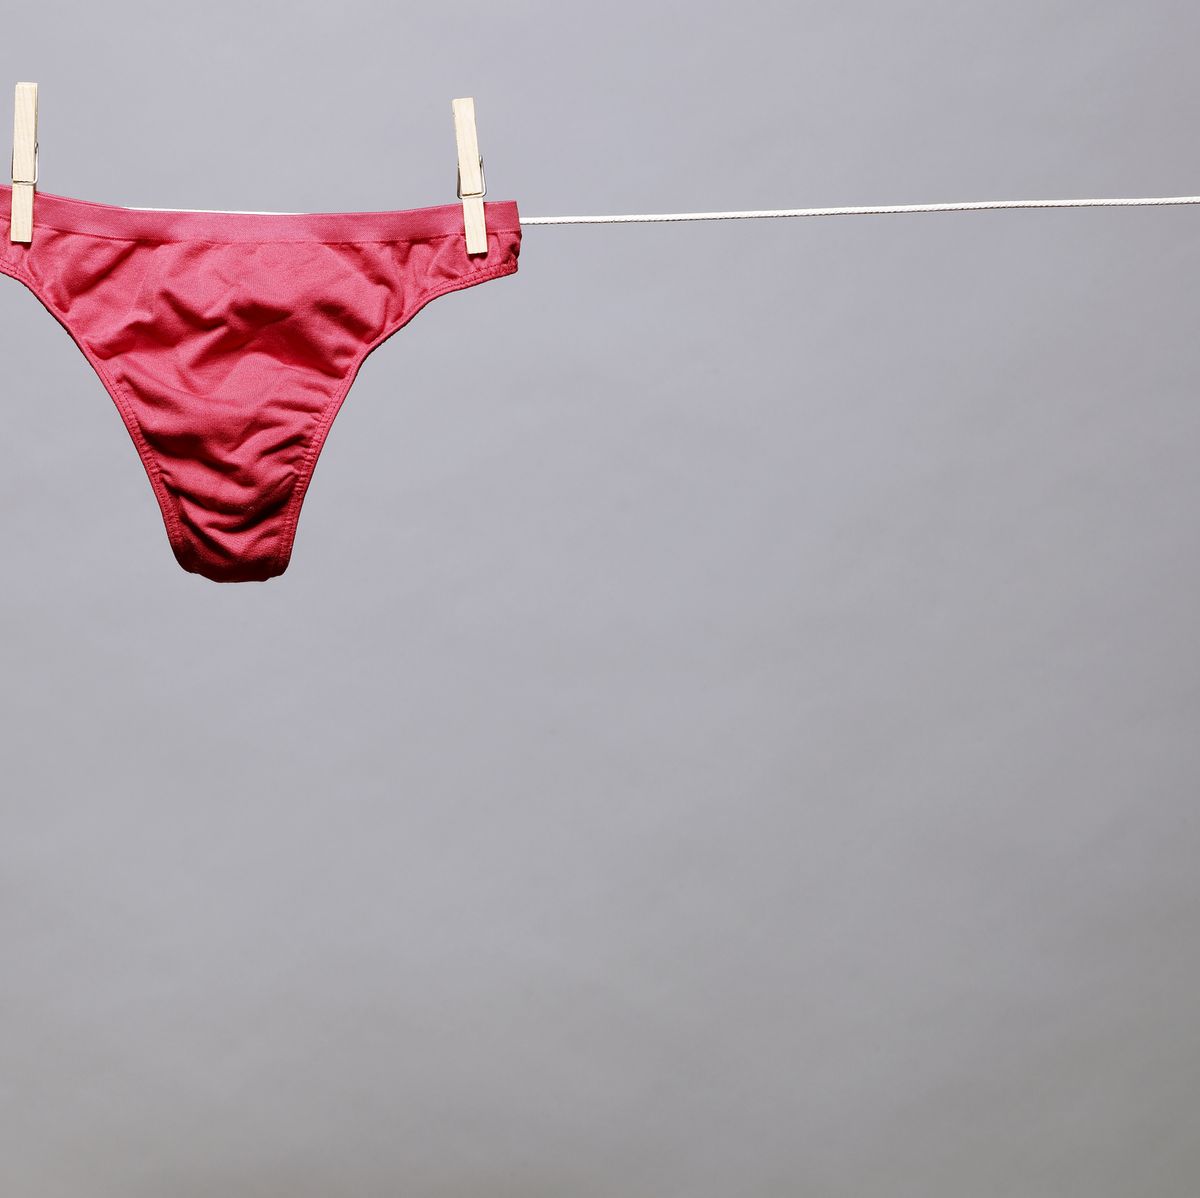 Wearing a wet underwear for too long can do this to your vaginal health